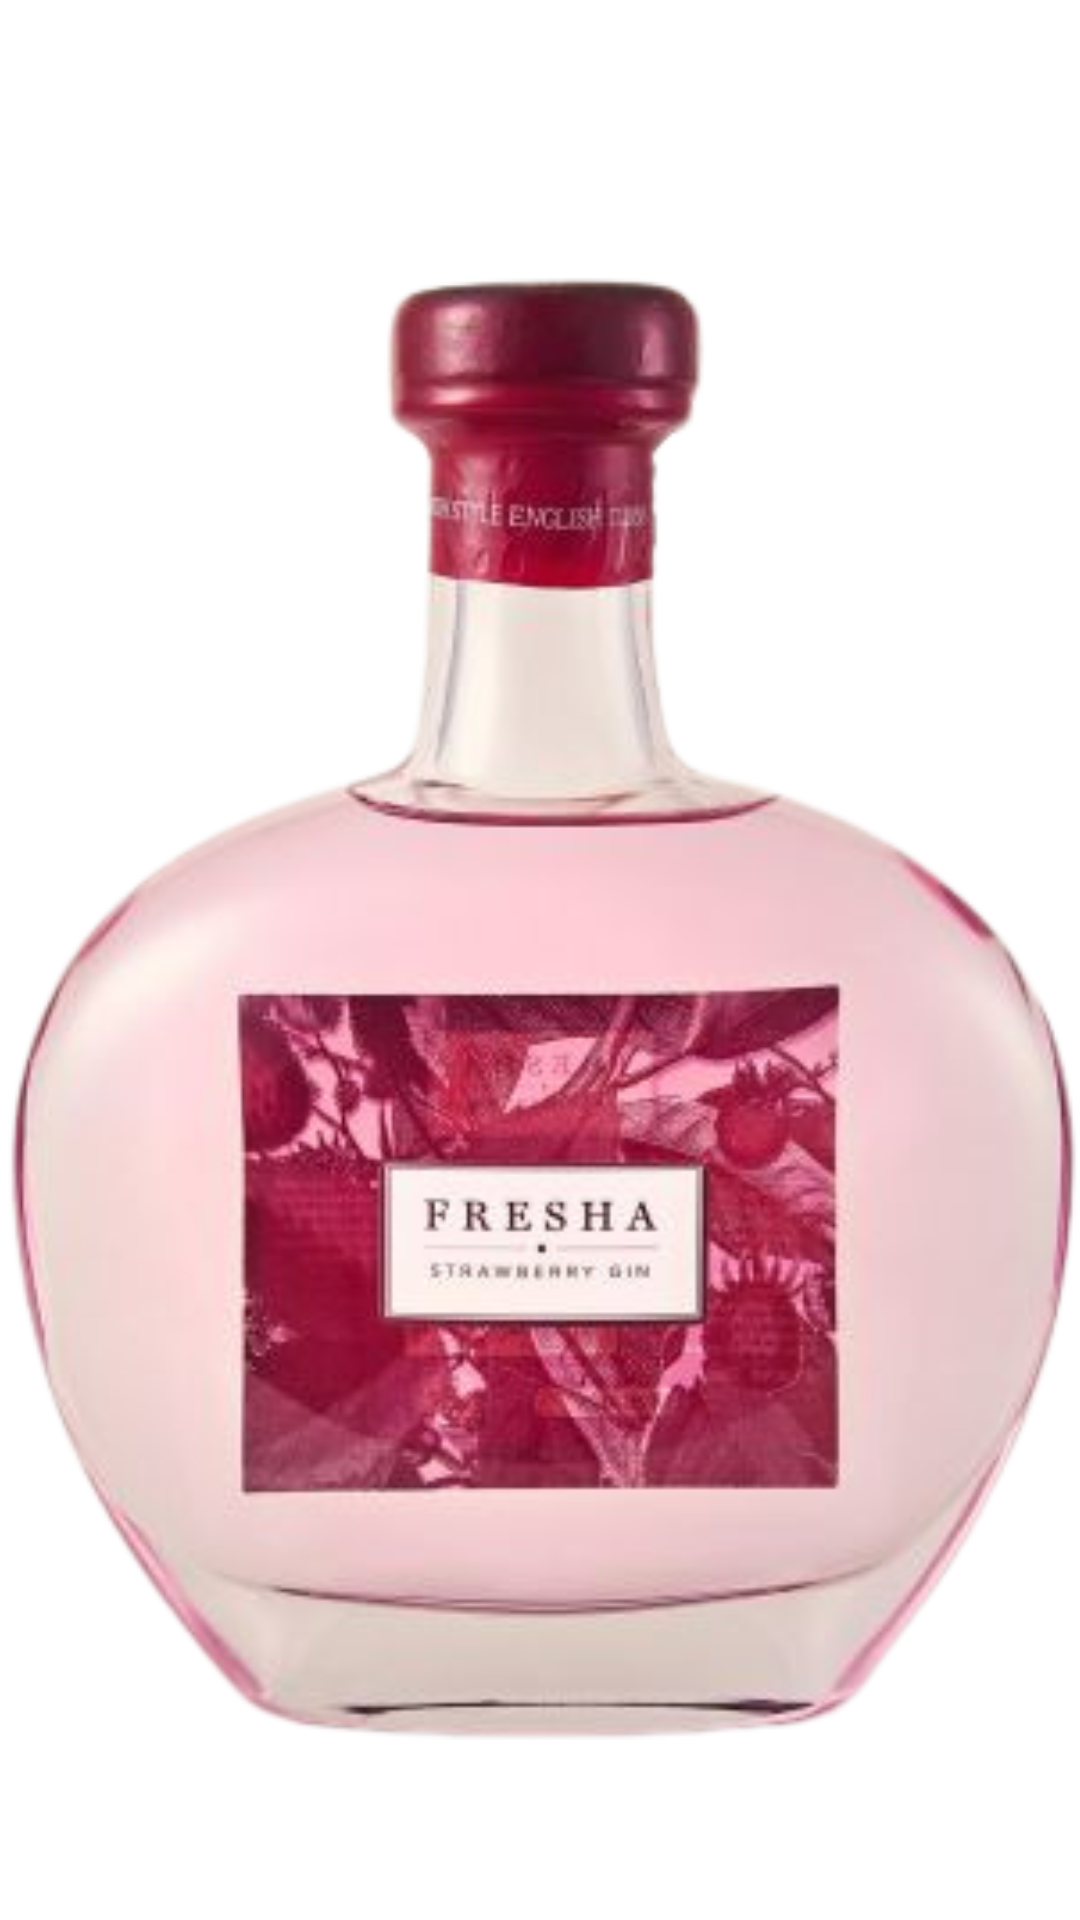 Fresha Strawberry Gin from Spain - Winner of Bronze medal at the London ...